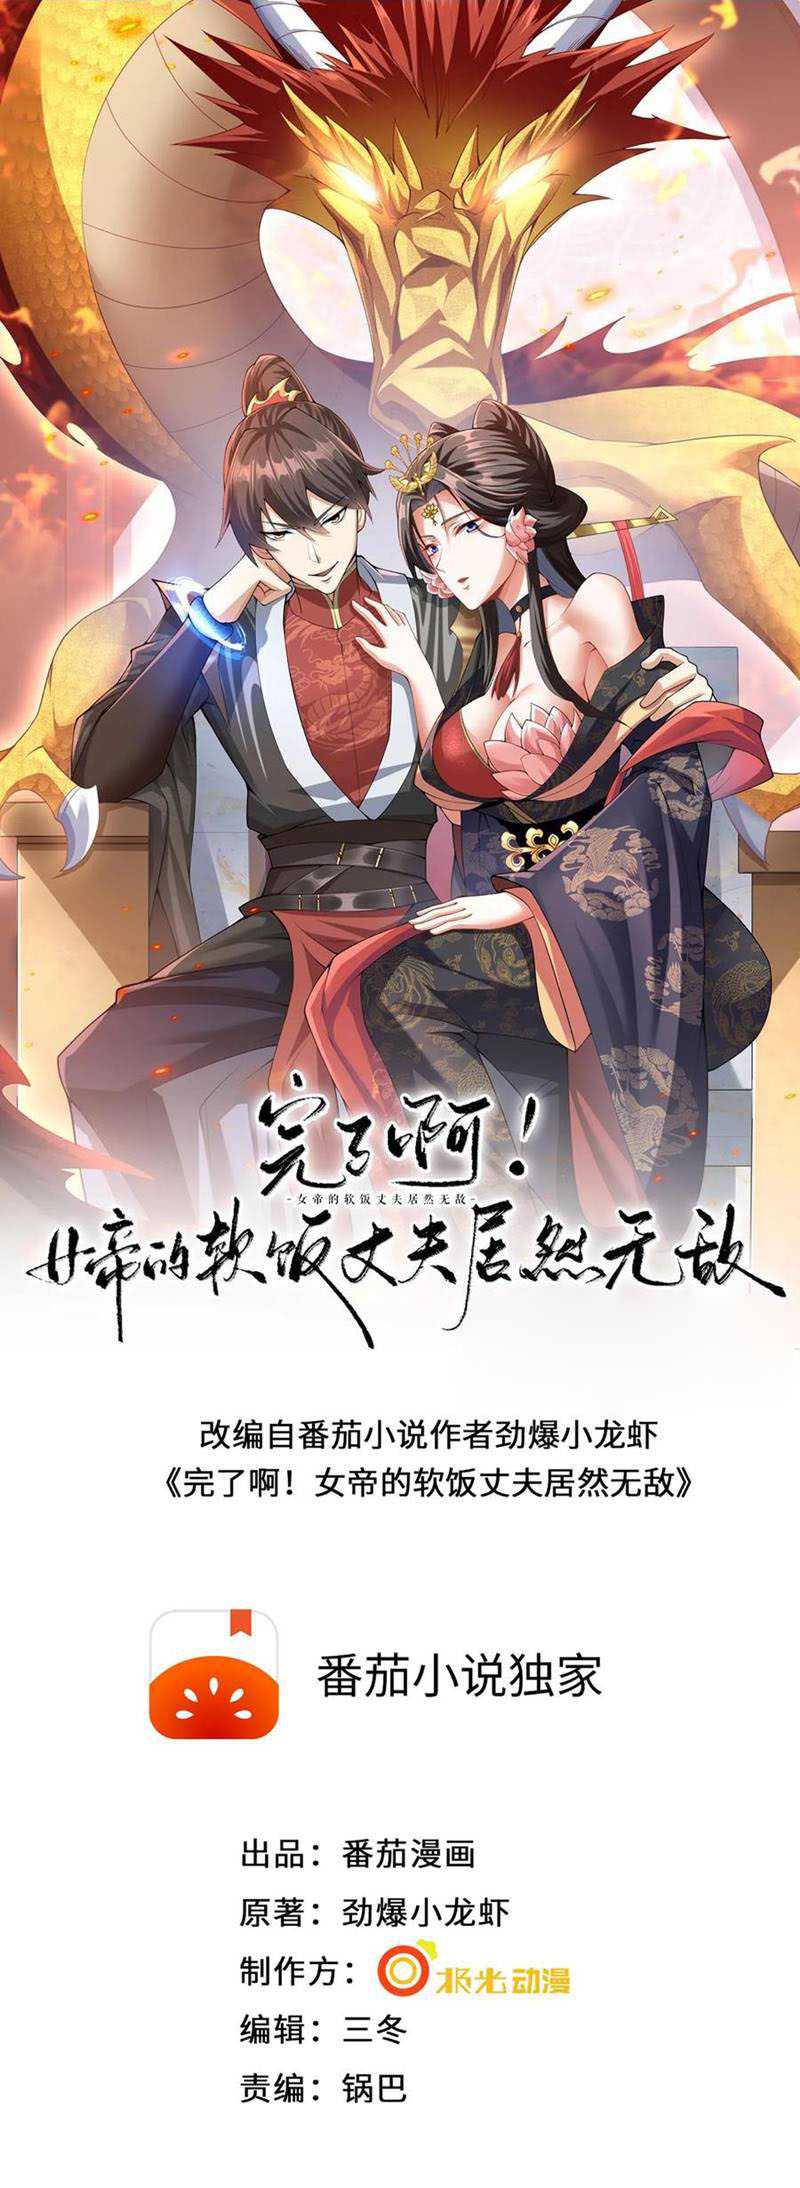 It’s Over! The Queen’s Soft Rice Husband is Actually Invincible Chapter 05